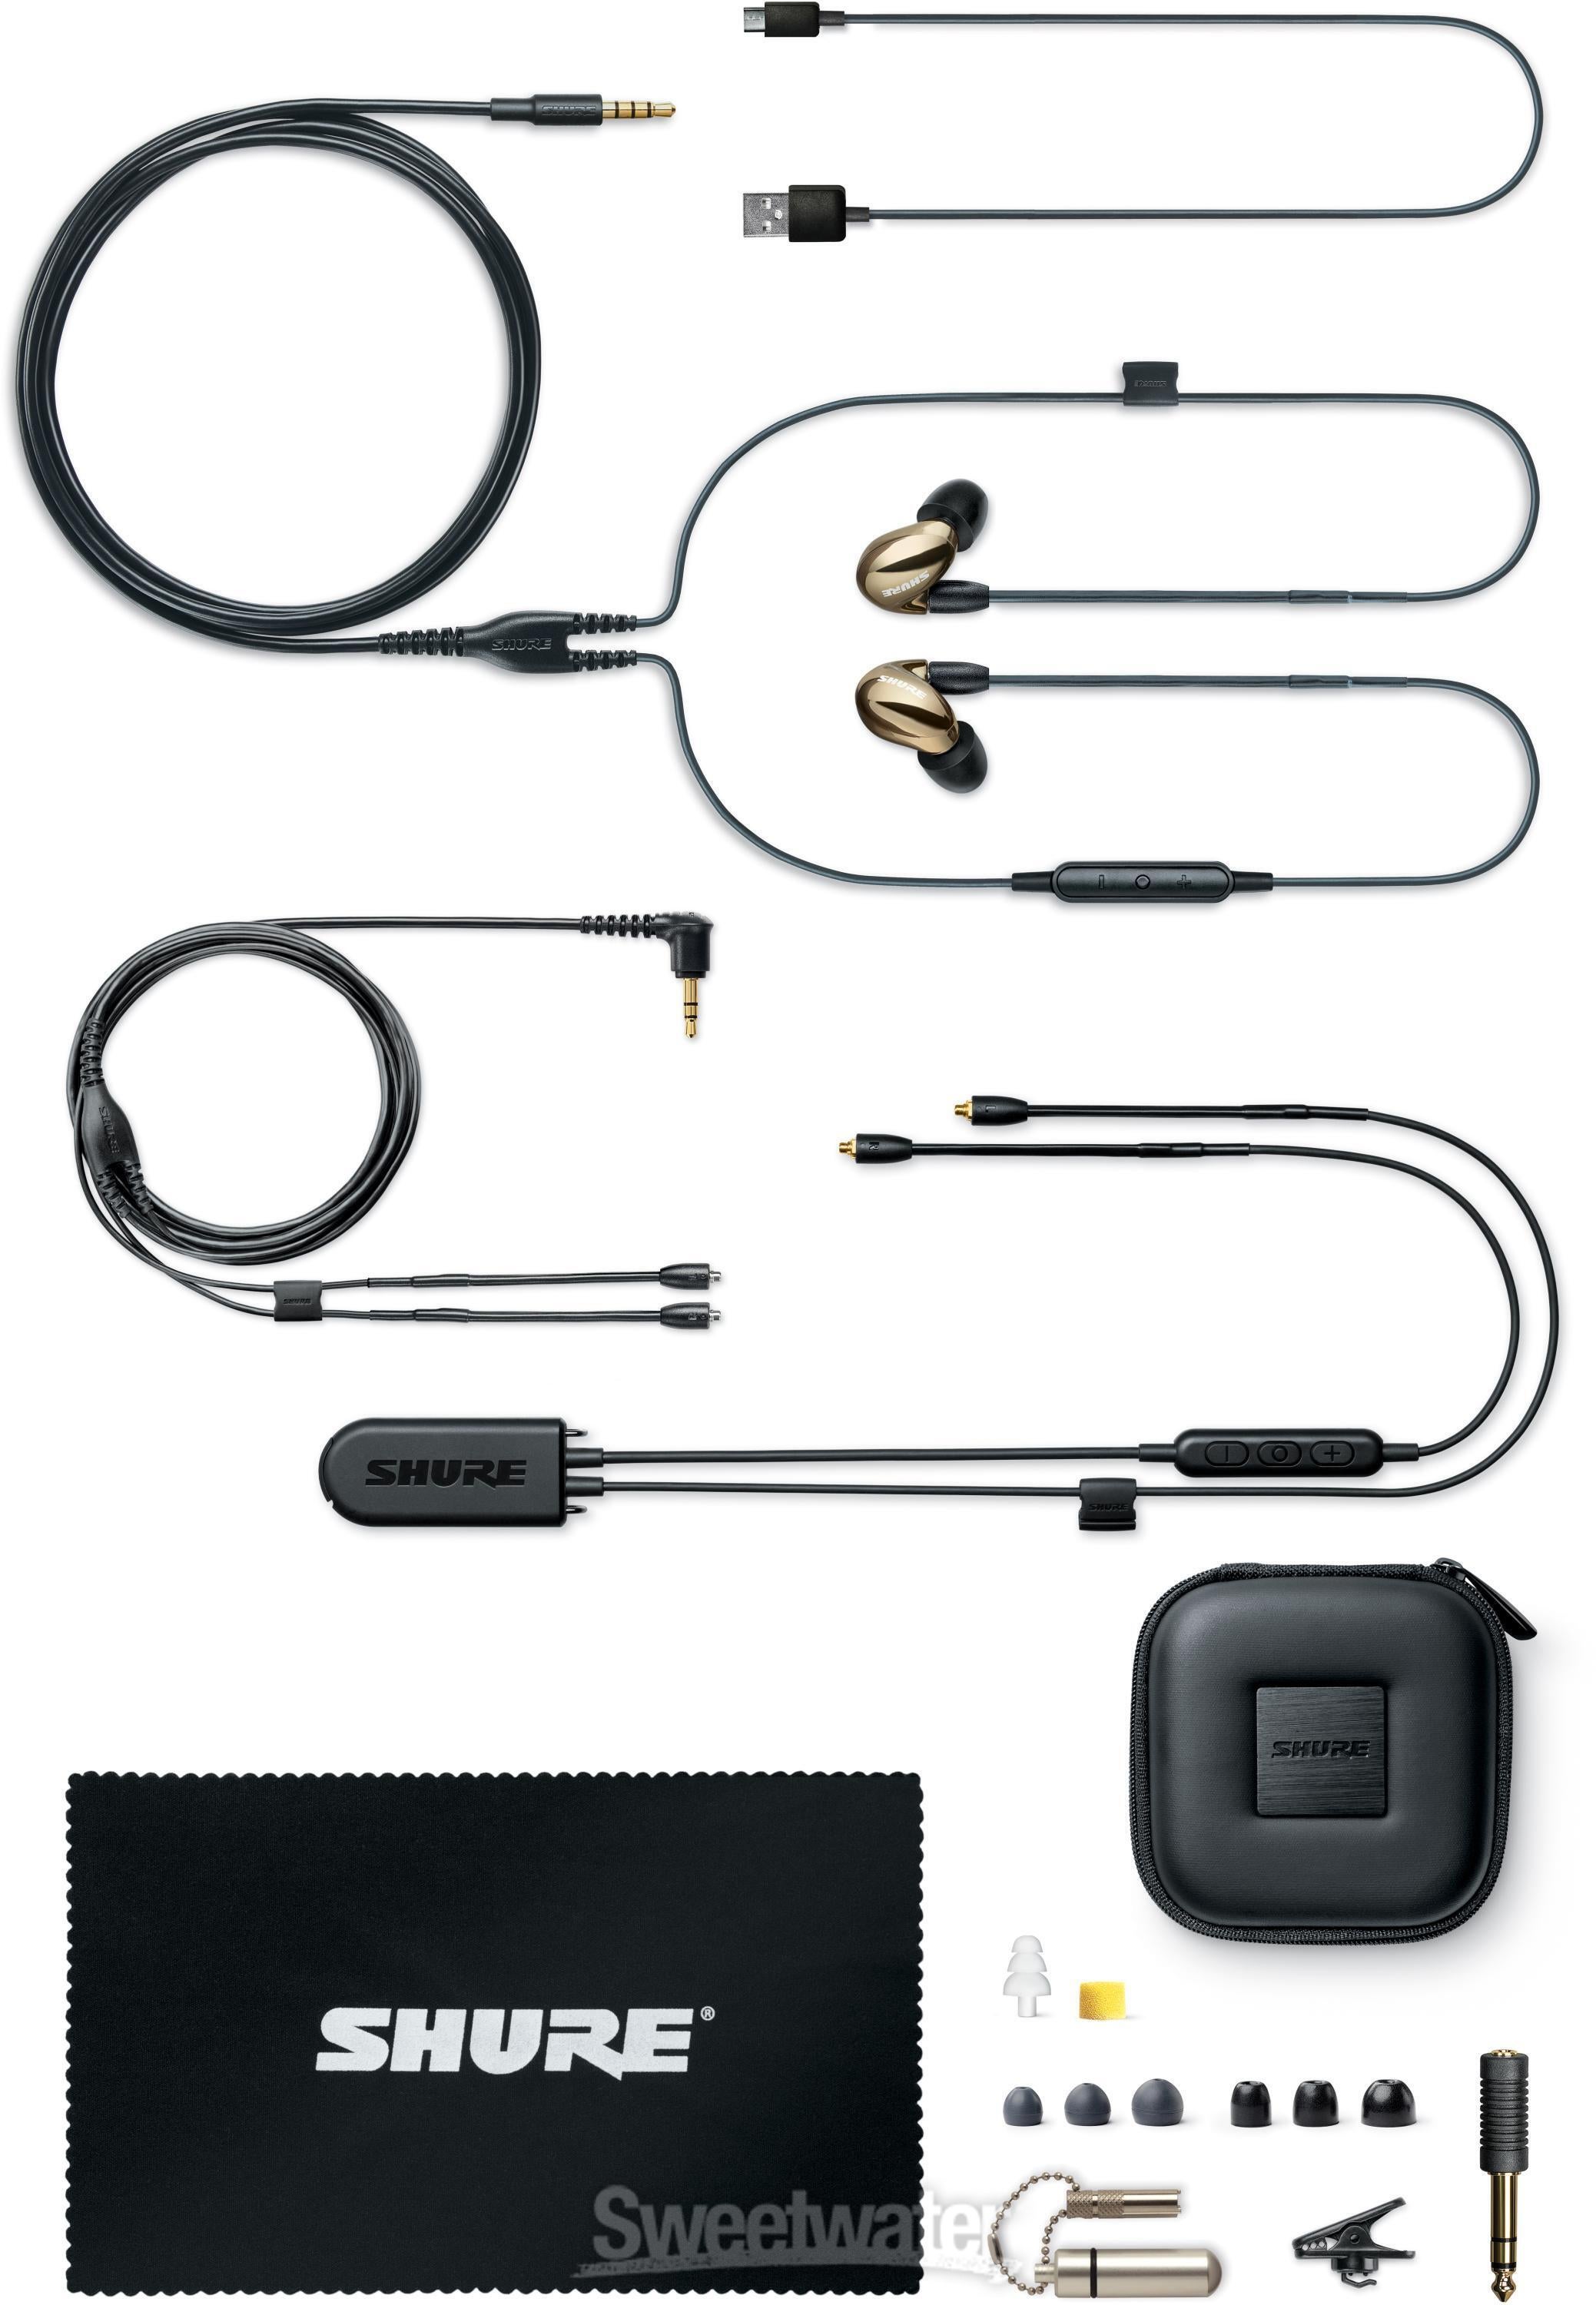 Shure SE846 Sound-isolating Earphones with Cable & Bluetooth